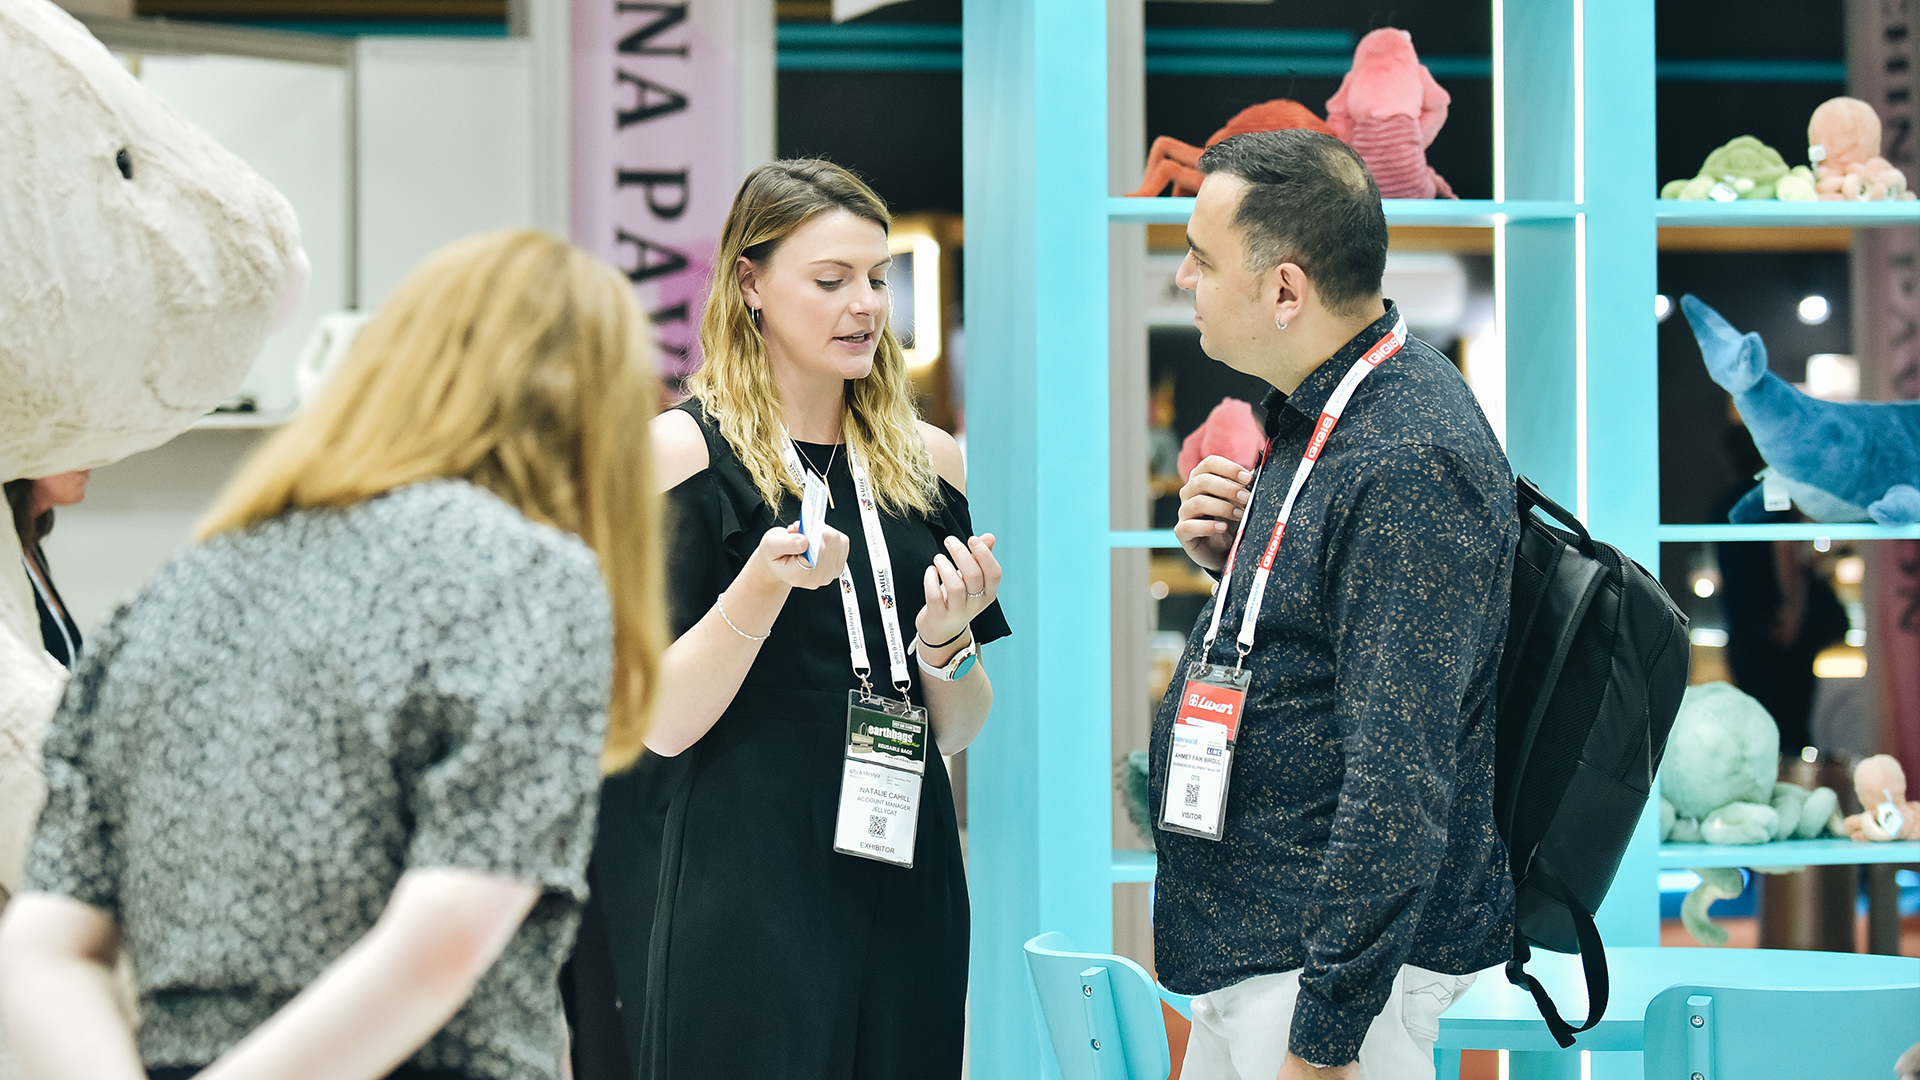 Gifts & Lifestyle Middle East -  All you need to know about visiting the show